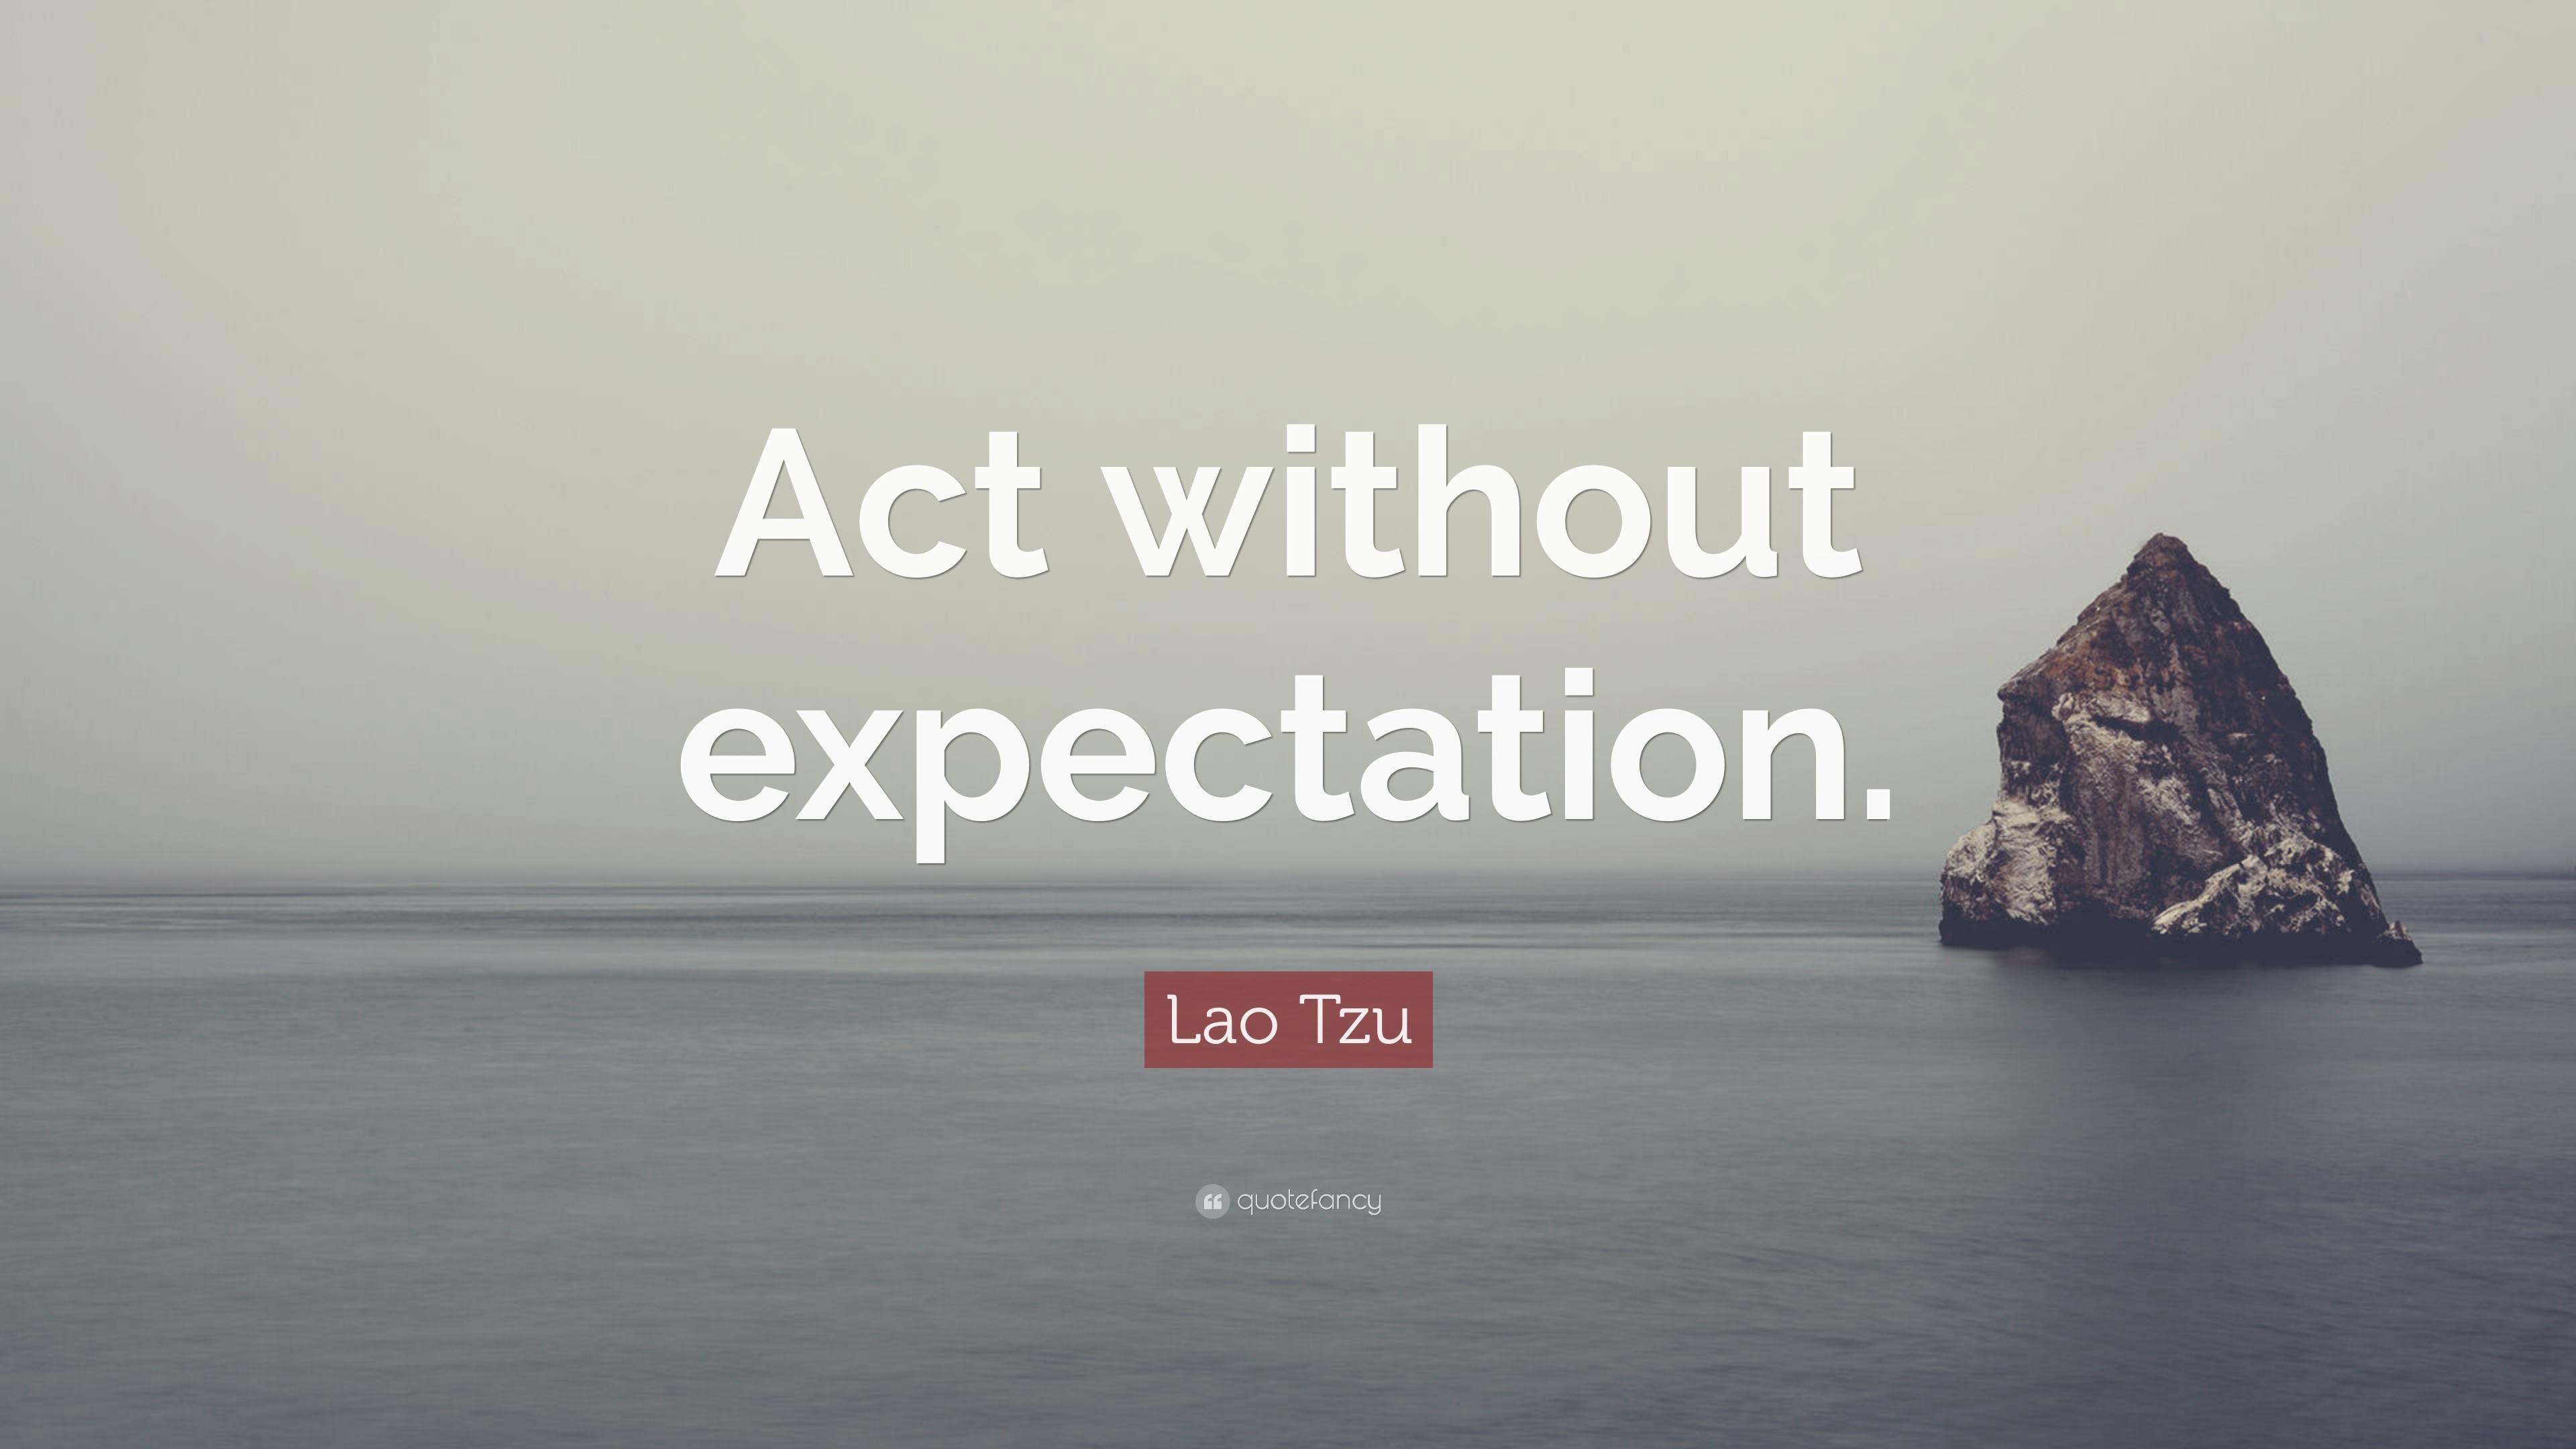 3840x2160 Lao Tzu Quote: “Act without expectation.”